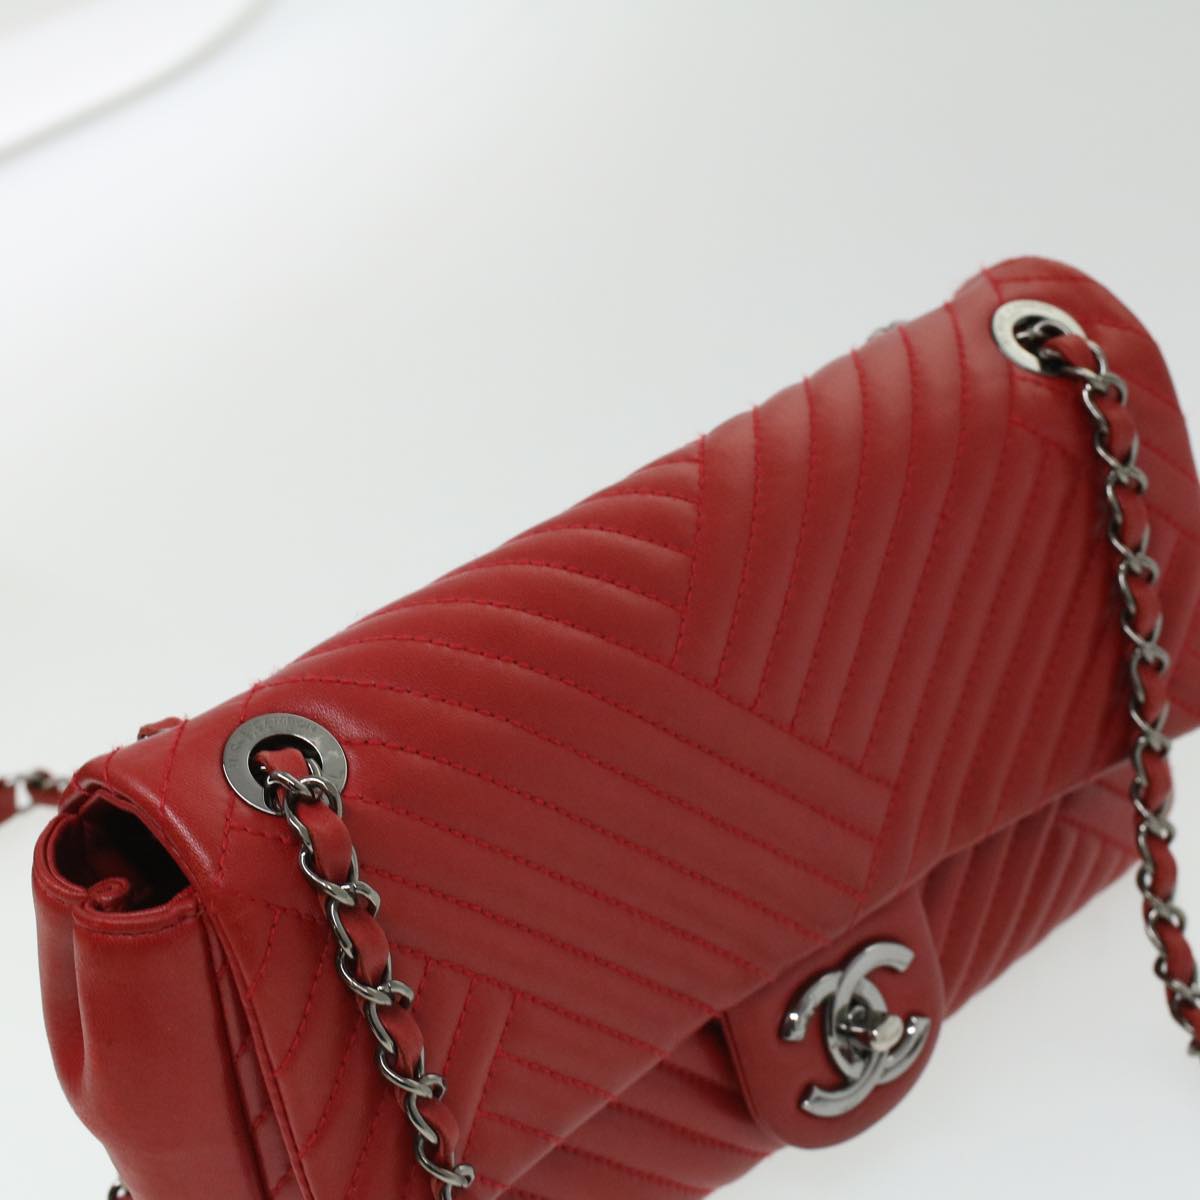 CHANEL Chain Shoulder Bag Lamb Skin Red CC Auth bs3636A